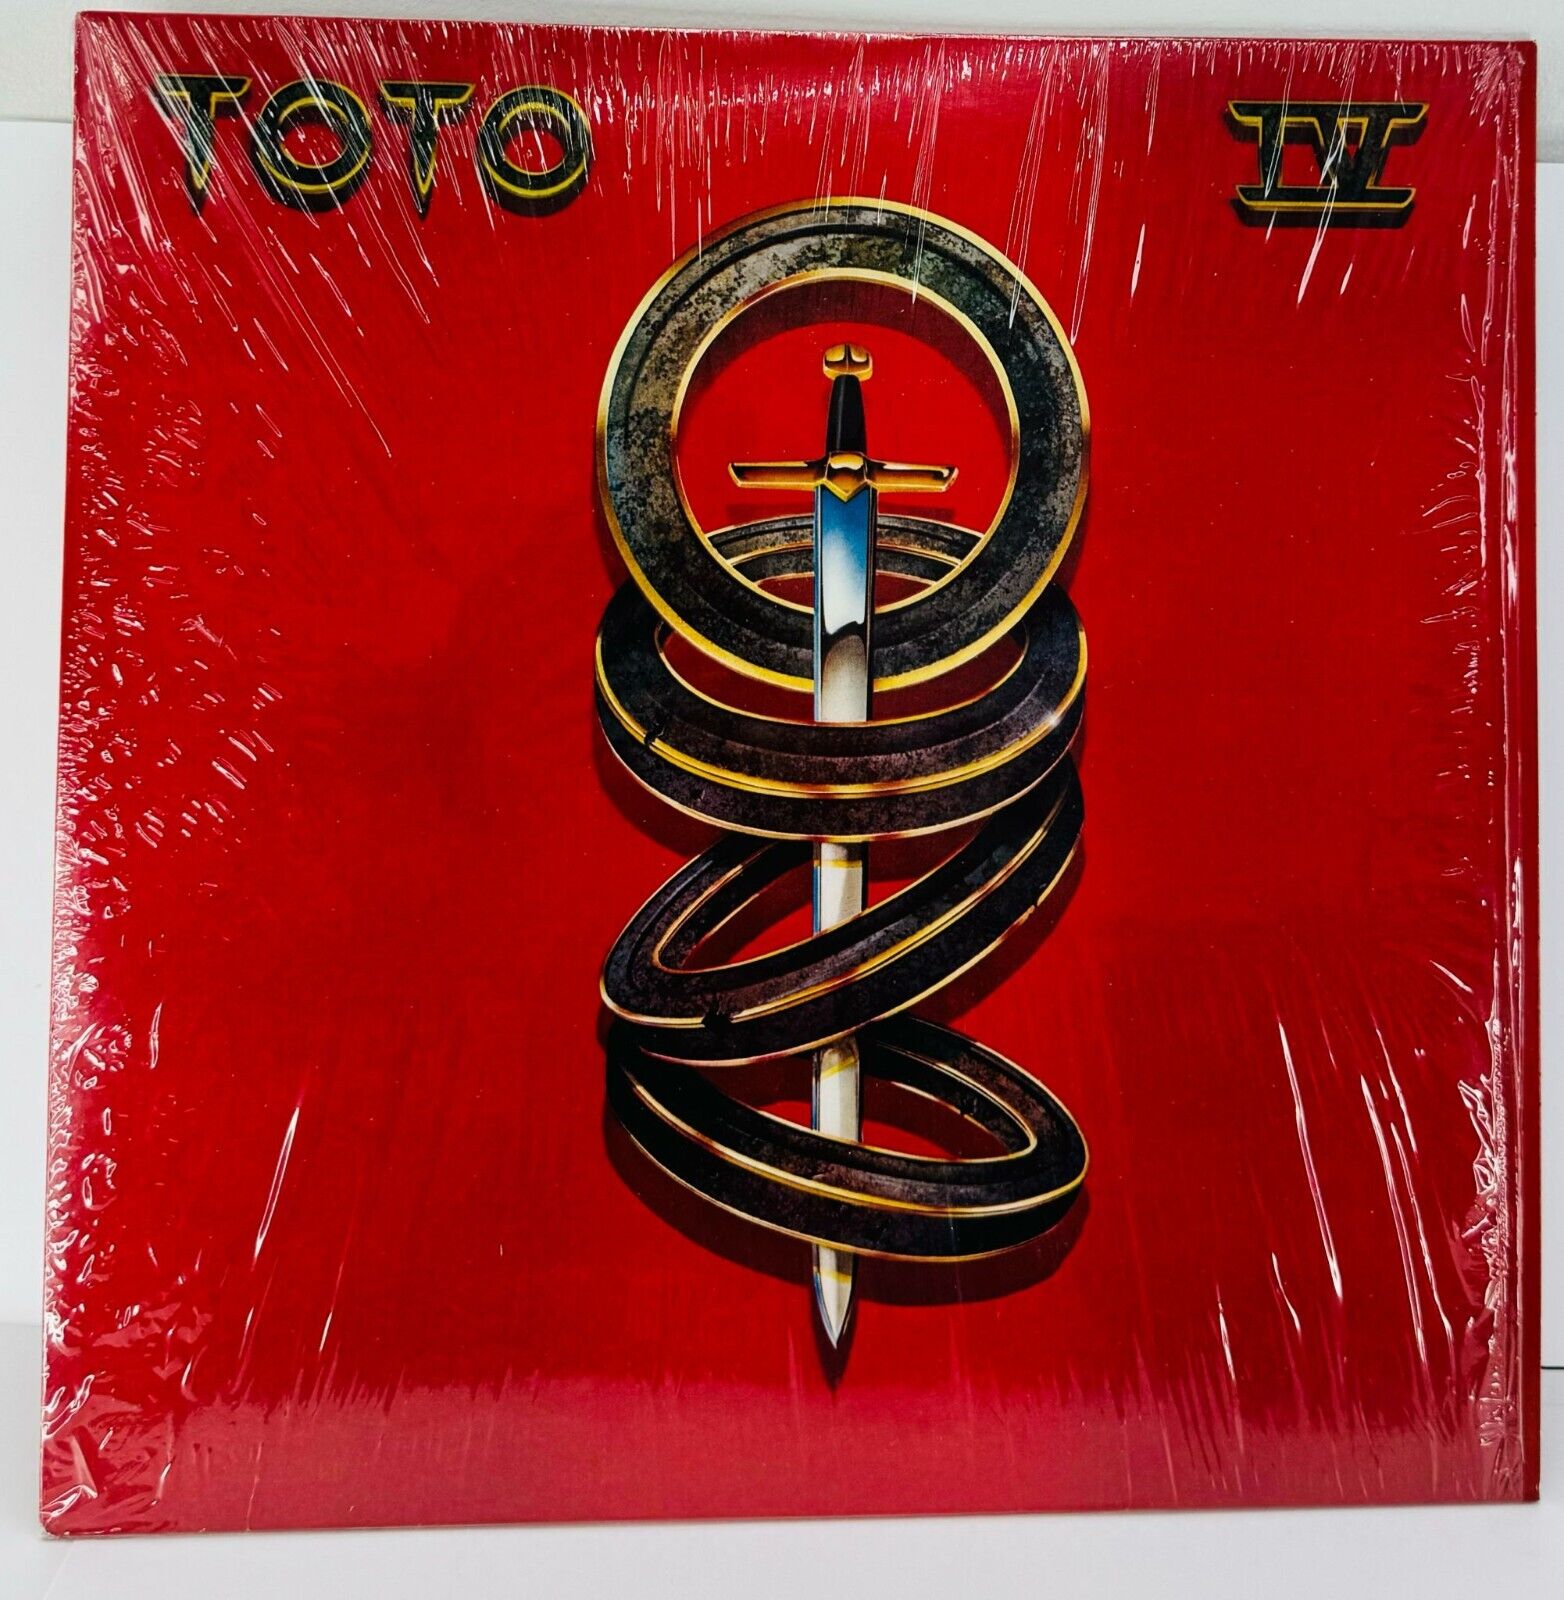 Toto IV by Toto - Vinyl